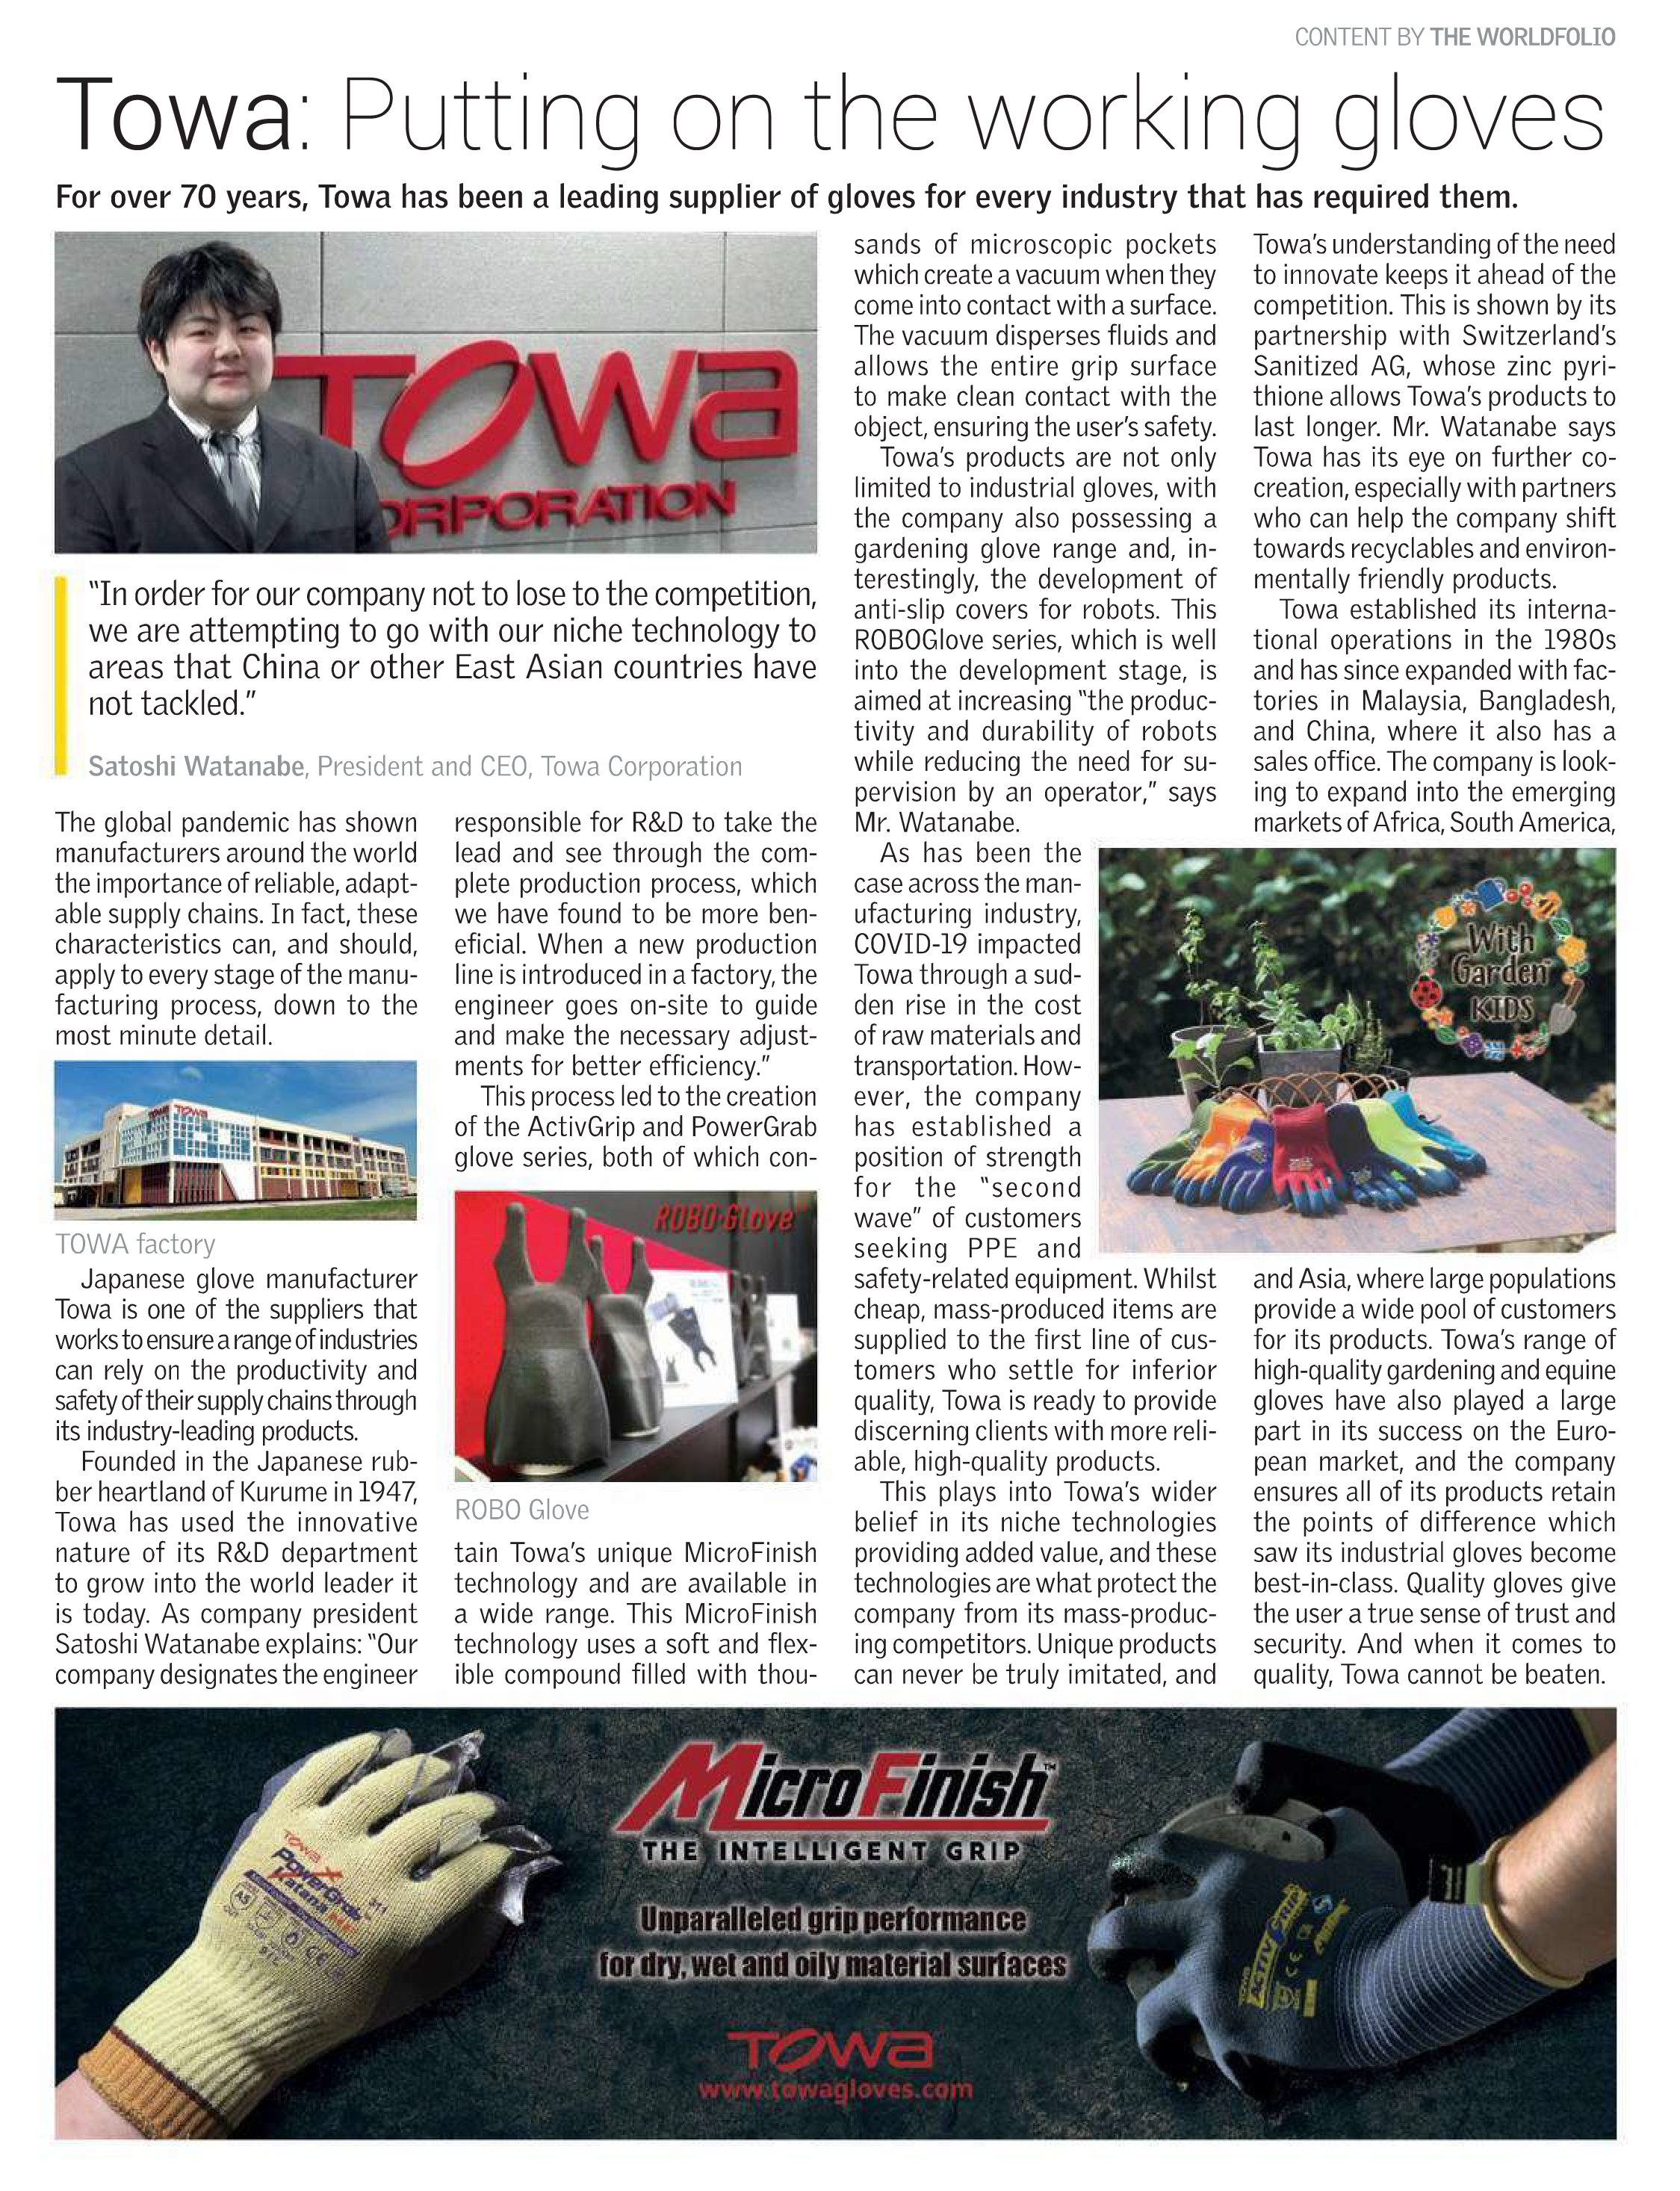 Article from Newsweek International about Towa Corporation published in 2022